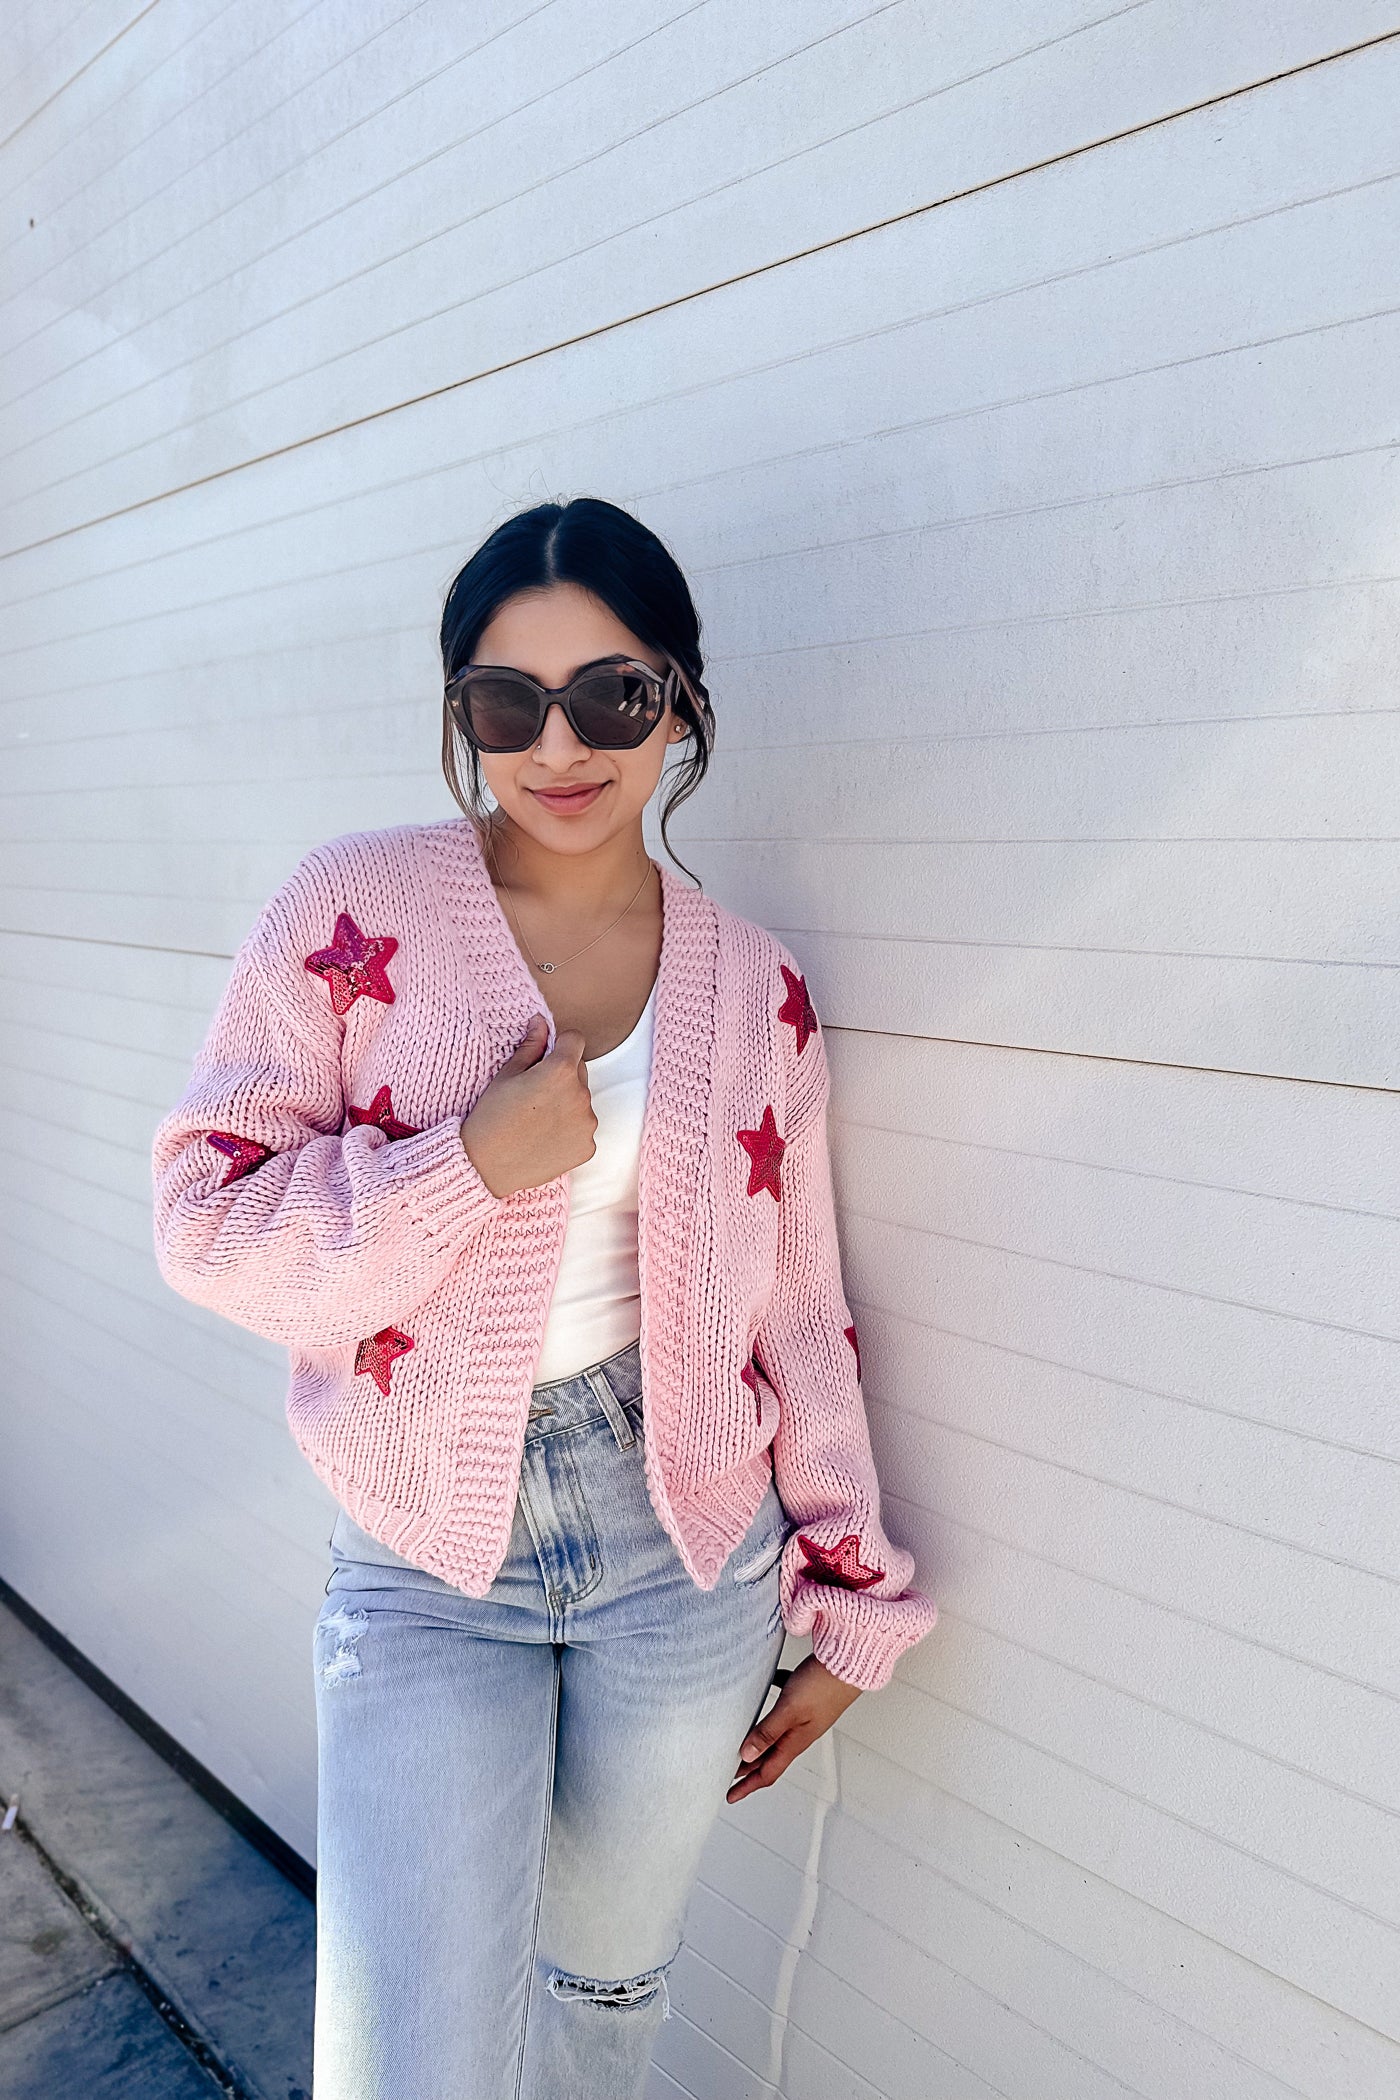 The Sequin Star Pink Patch Sweater Cardigan